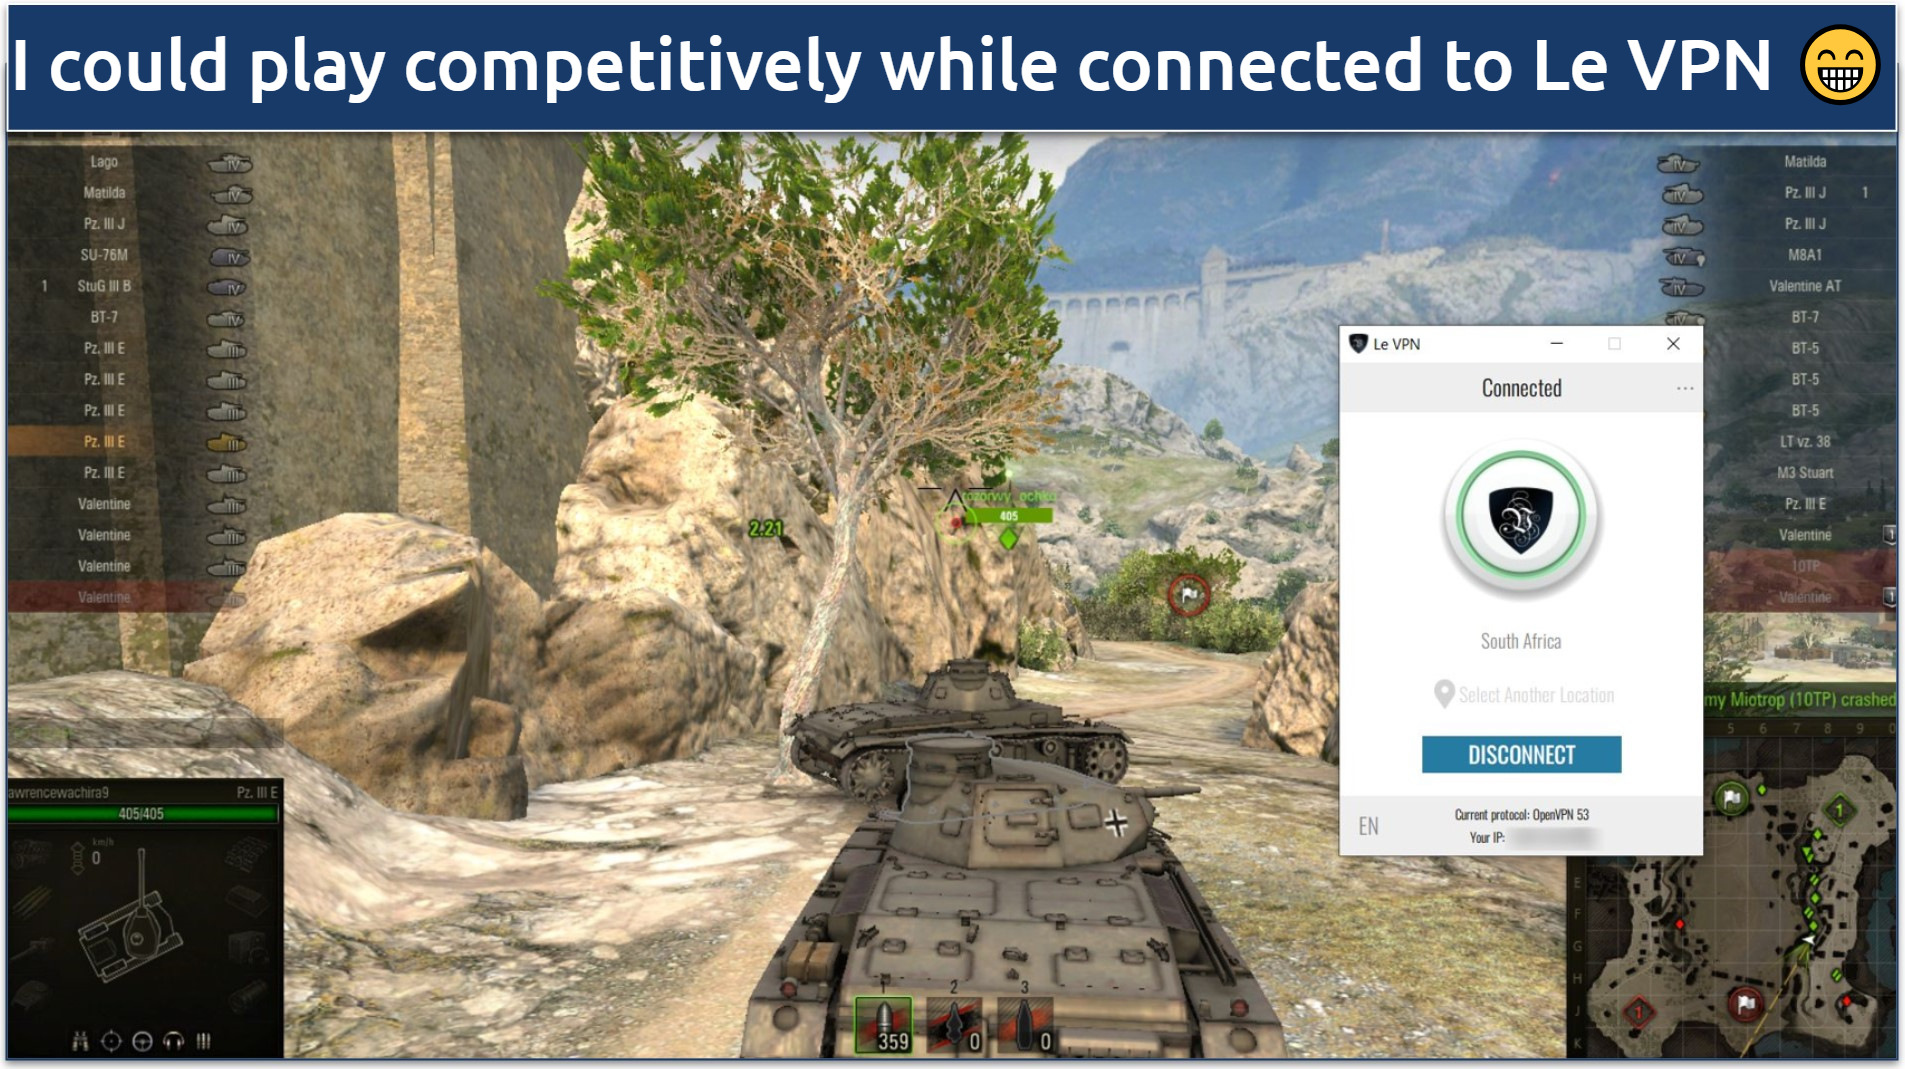 AA screenshot showing playing World of Tanks while connected to Le VPN's South African server